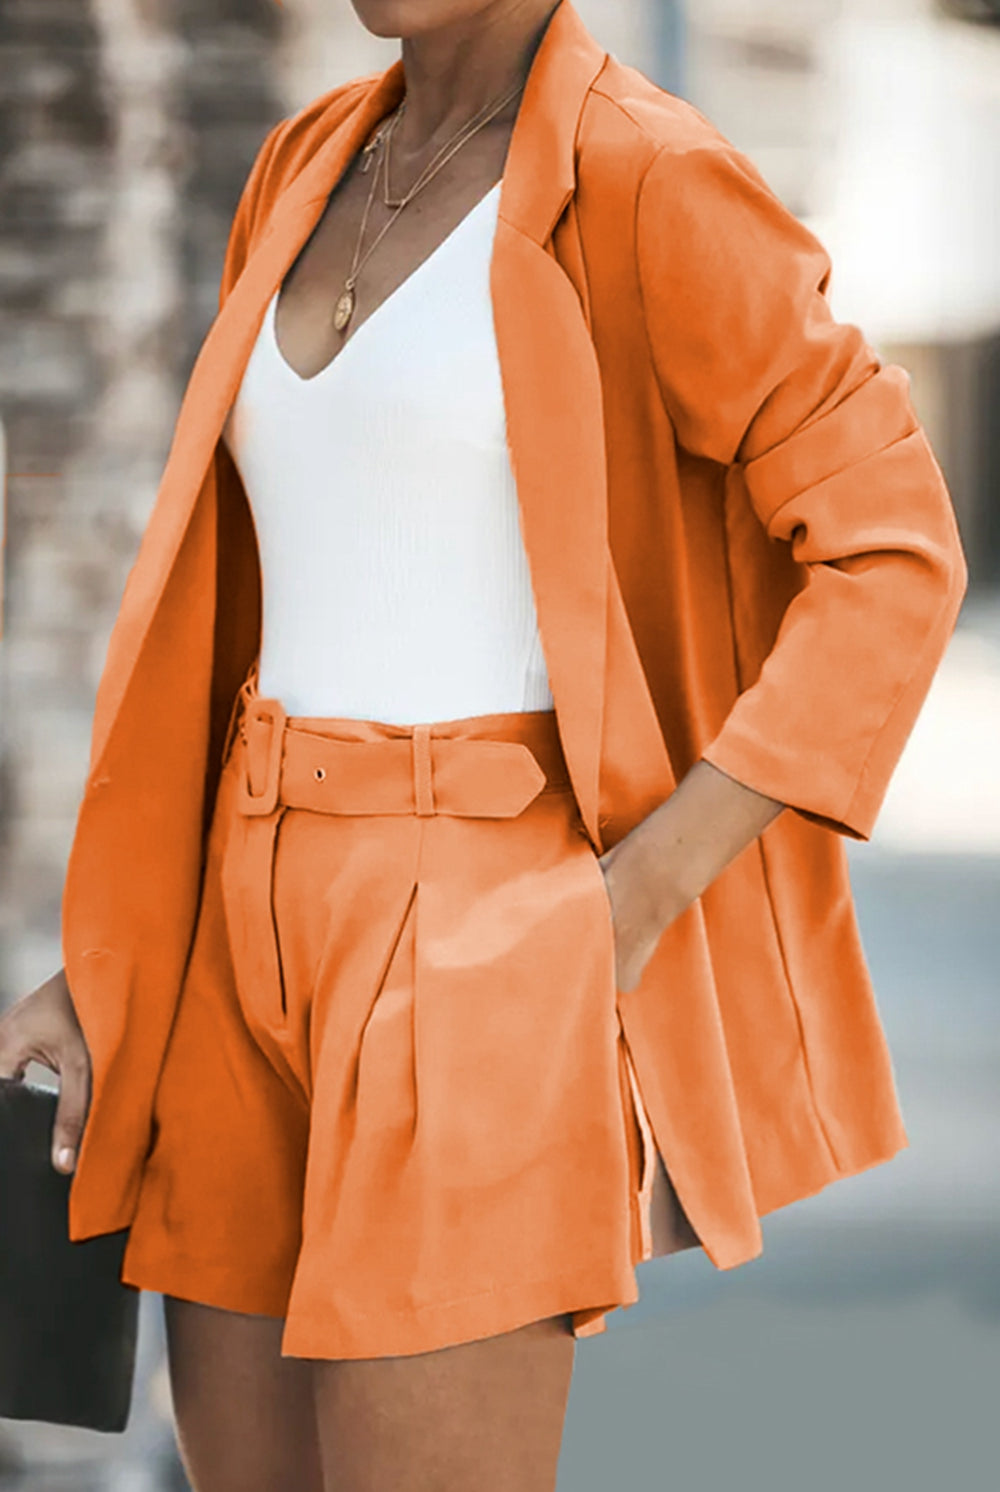 Rosy Brown Longline Blazer and Shorts Set with Pockets Outfit Sets